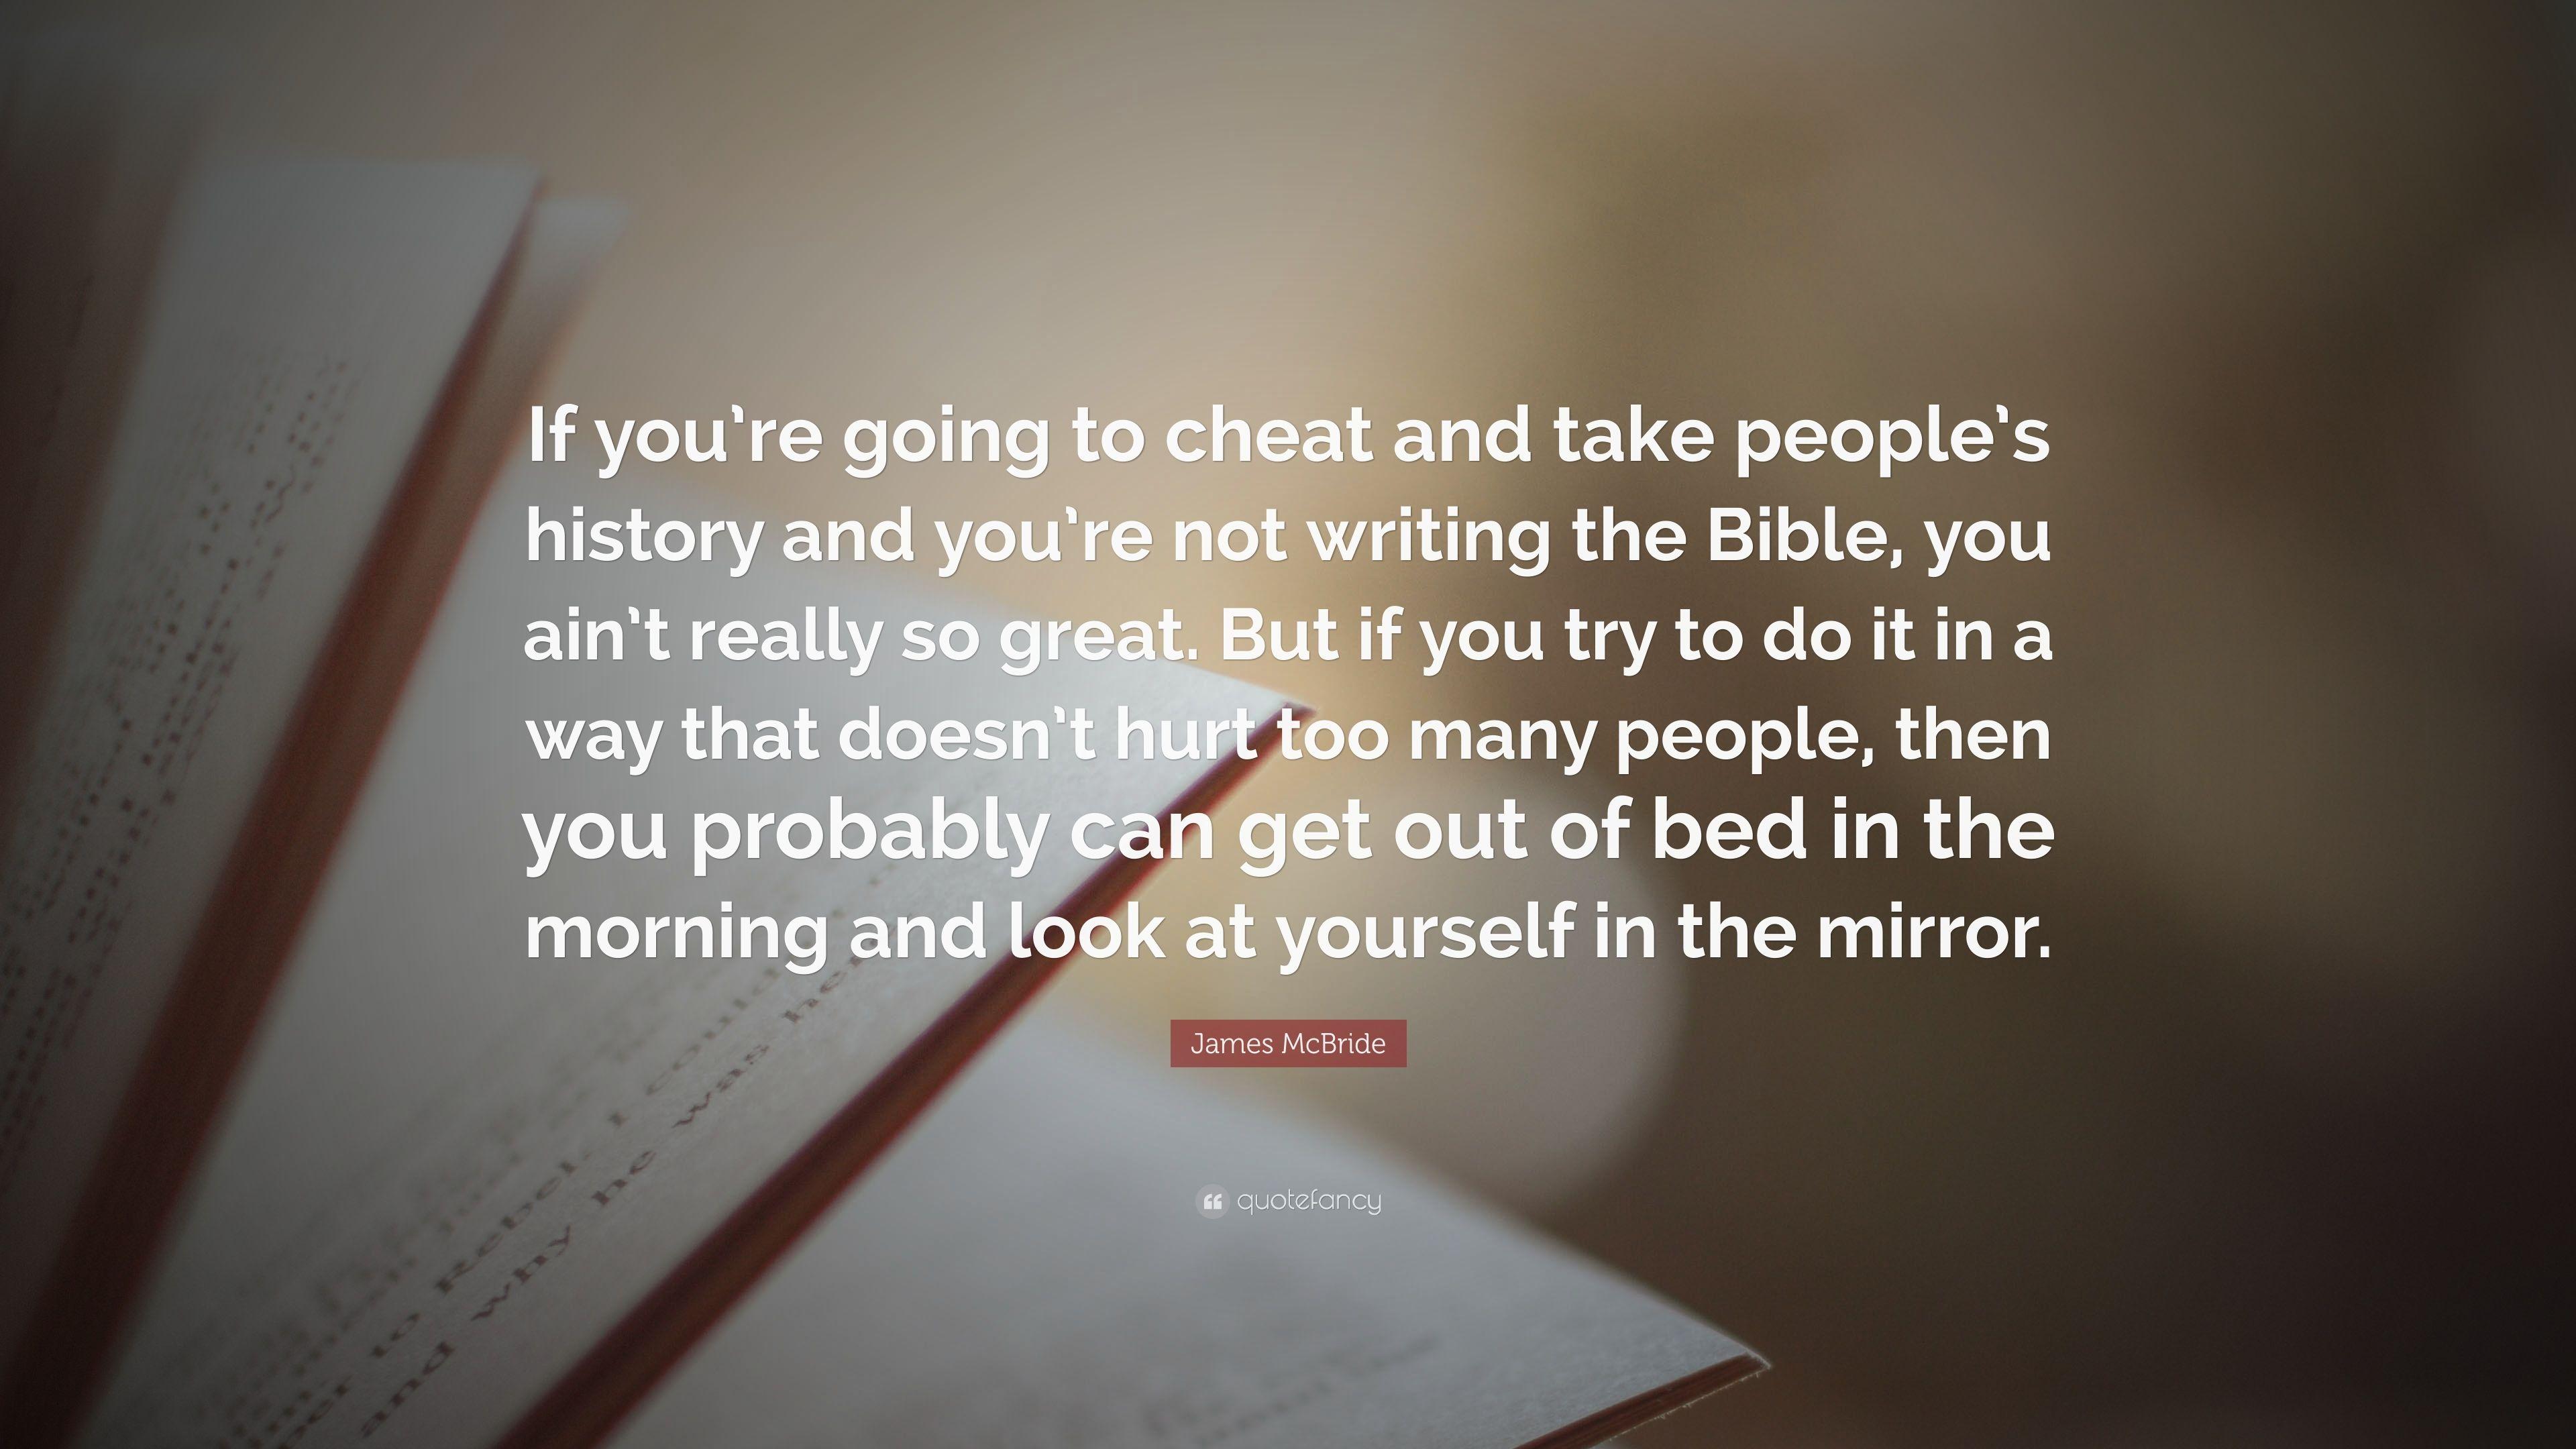 James McBride Quote: “If you're going to cheat and take people's